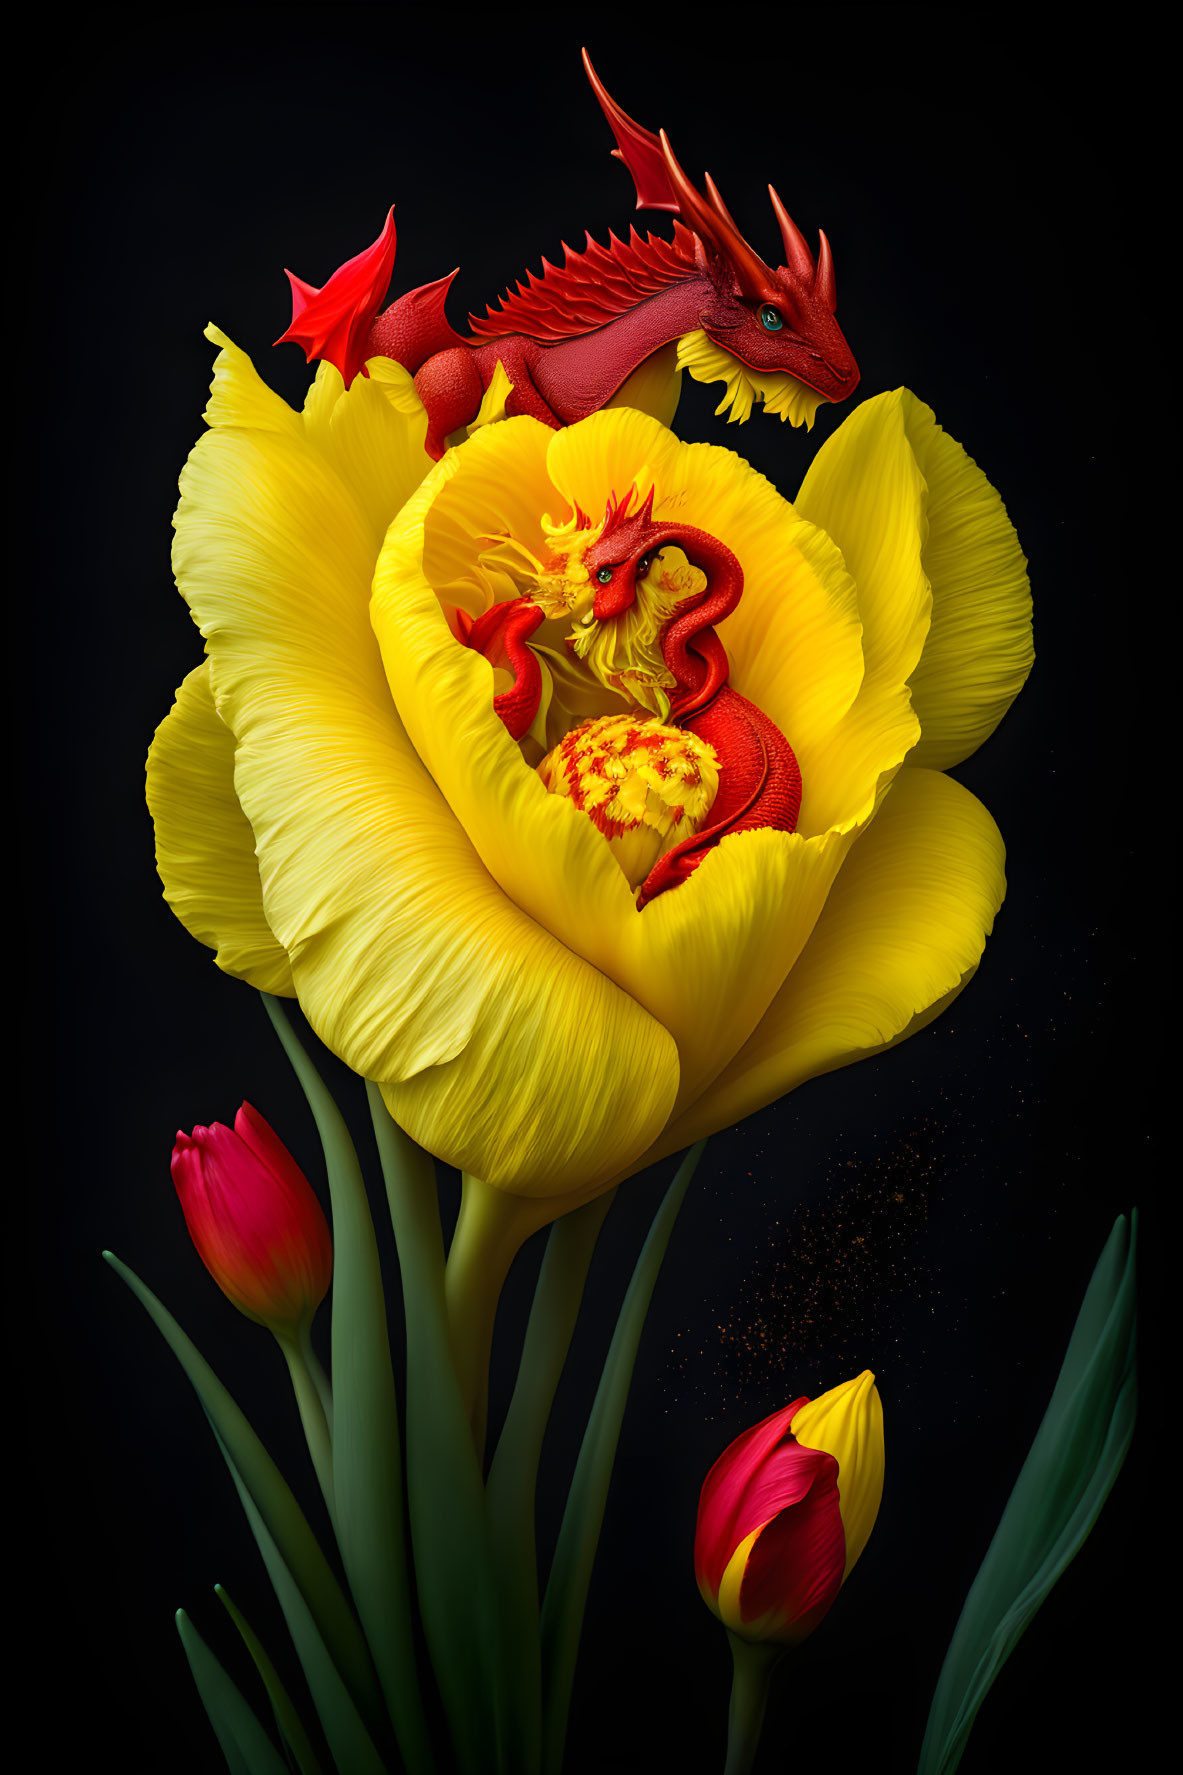 Detailed illustration: Large yellow tulip with two red dragons nestled in petals on dark background